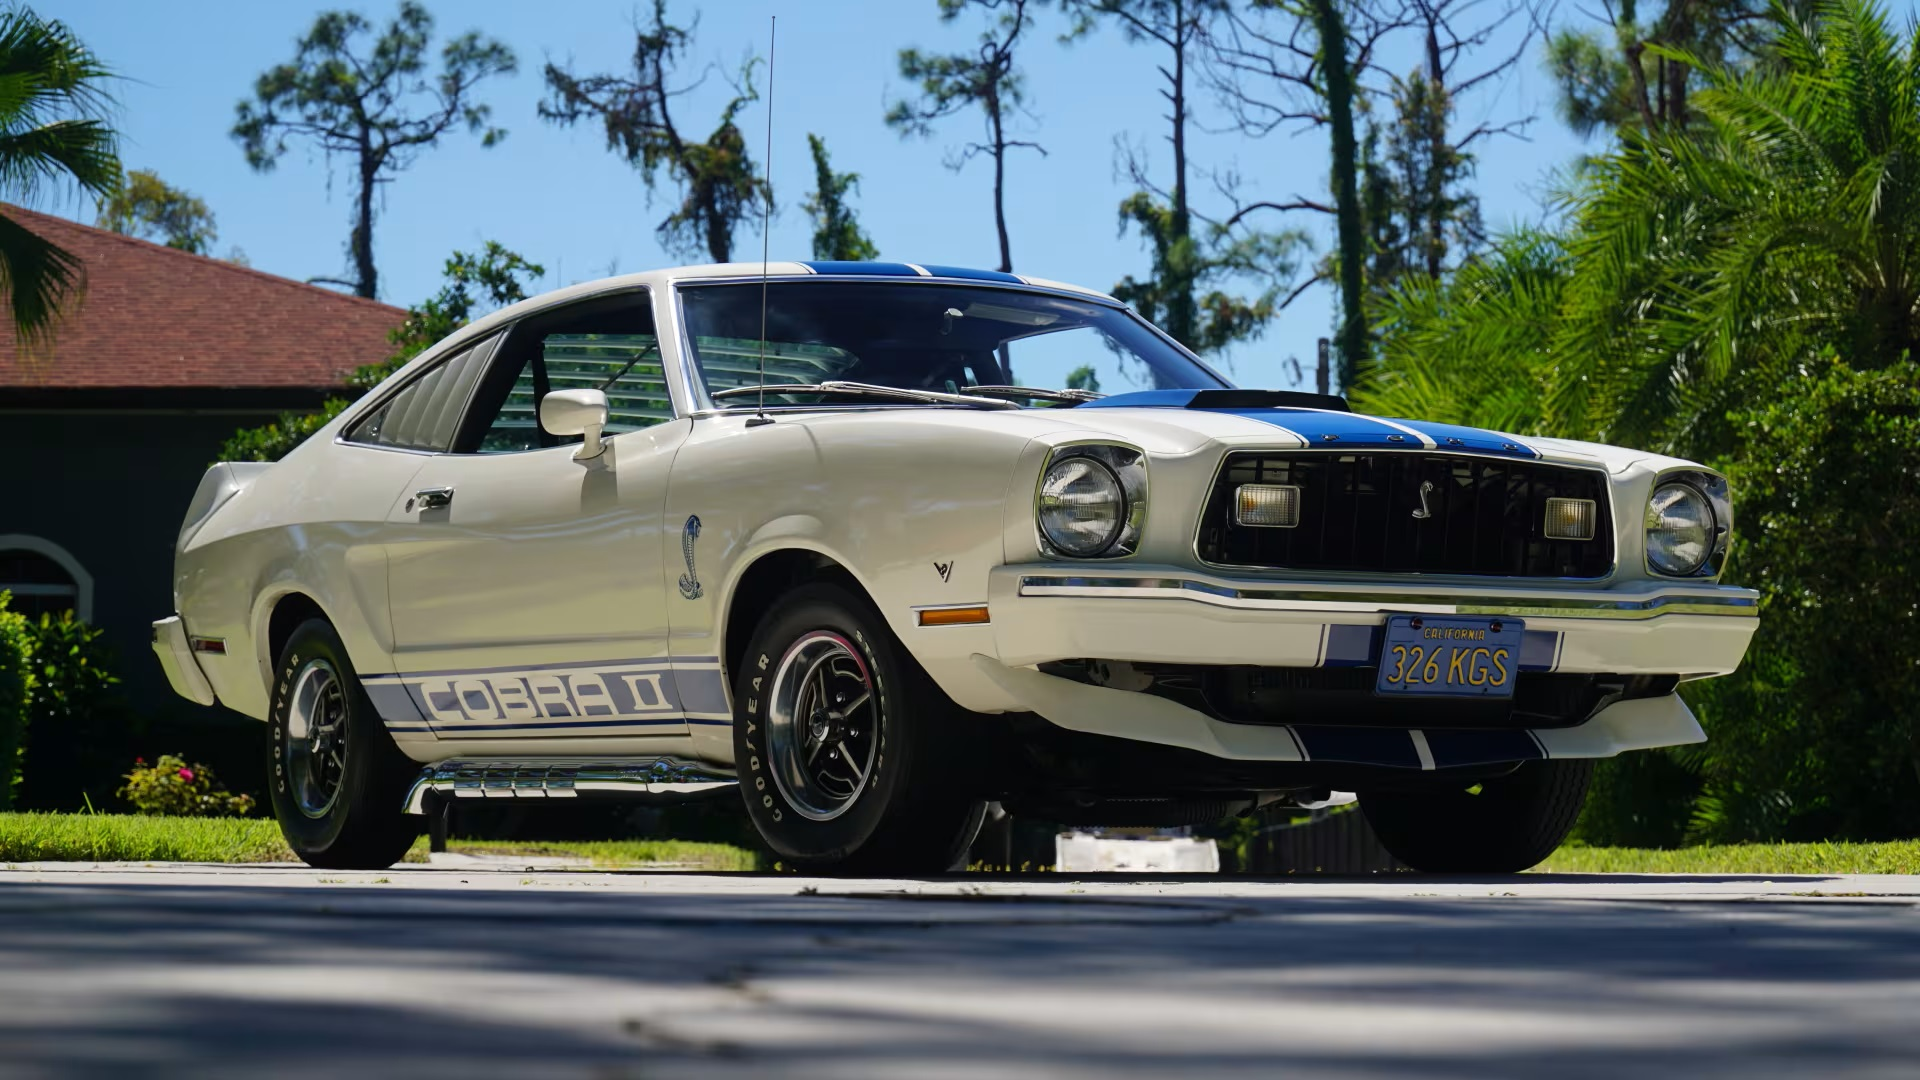 Mustang Of The Day: 1976 Ford Mustang Cobra II